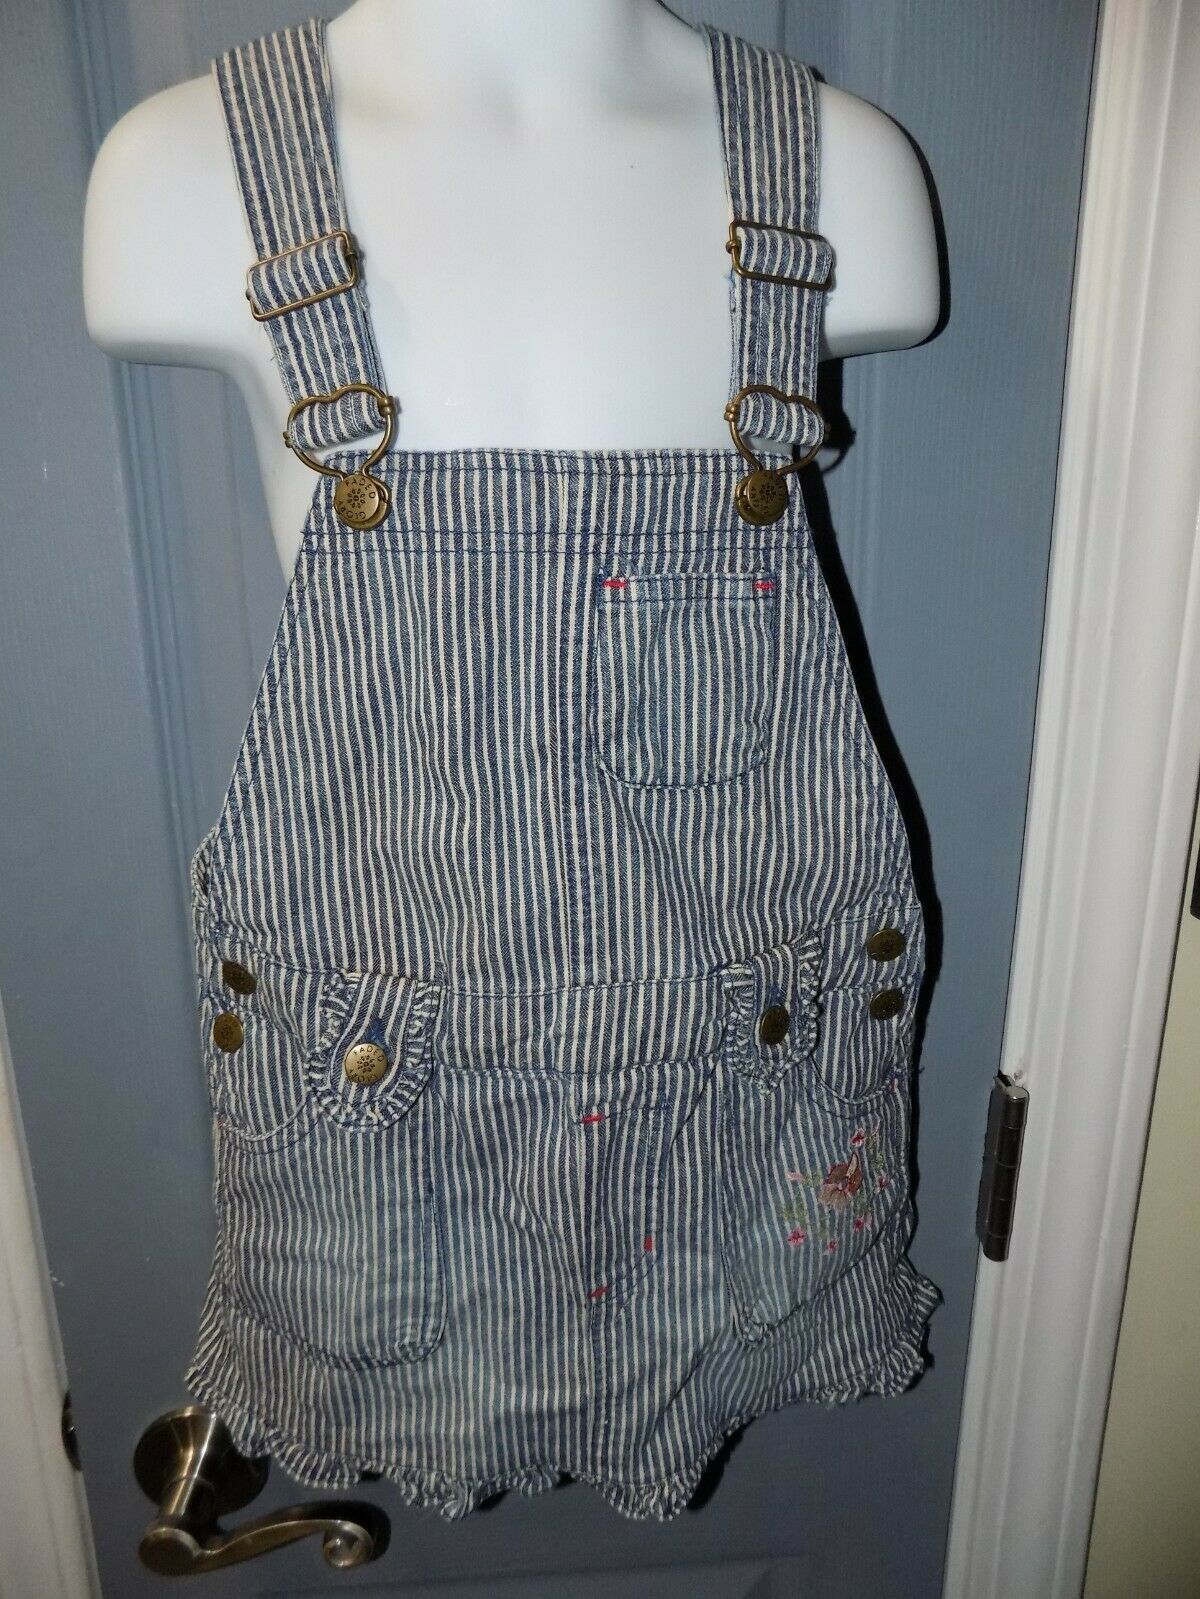 Faded Glory Striped Jean Overall Pocket Dress Adjustable Straps Size 6 Girl's - $17.20